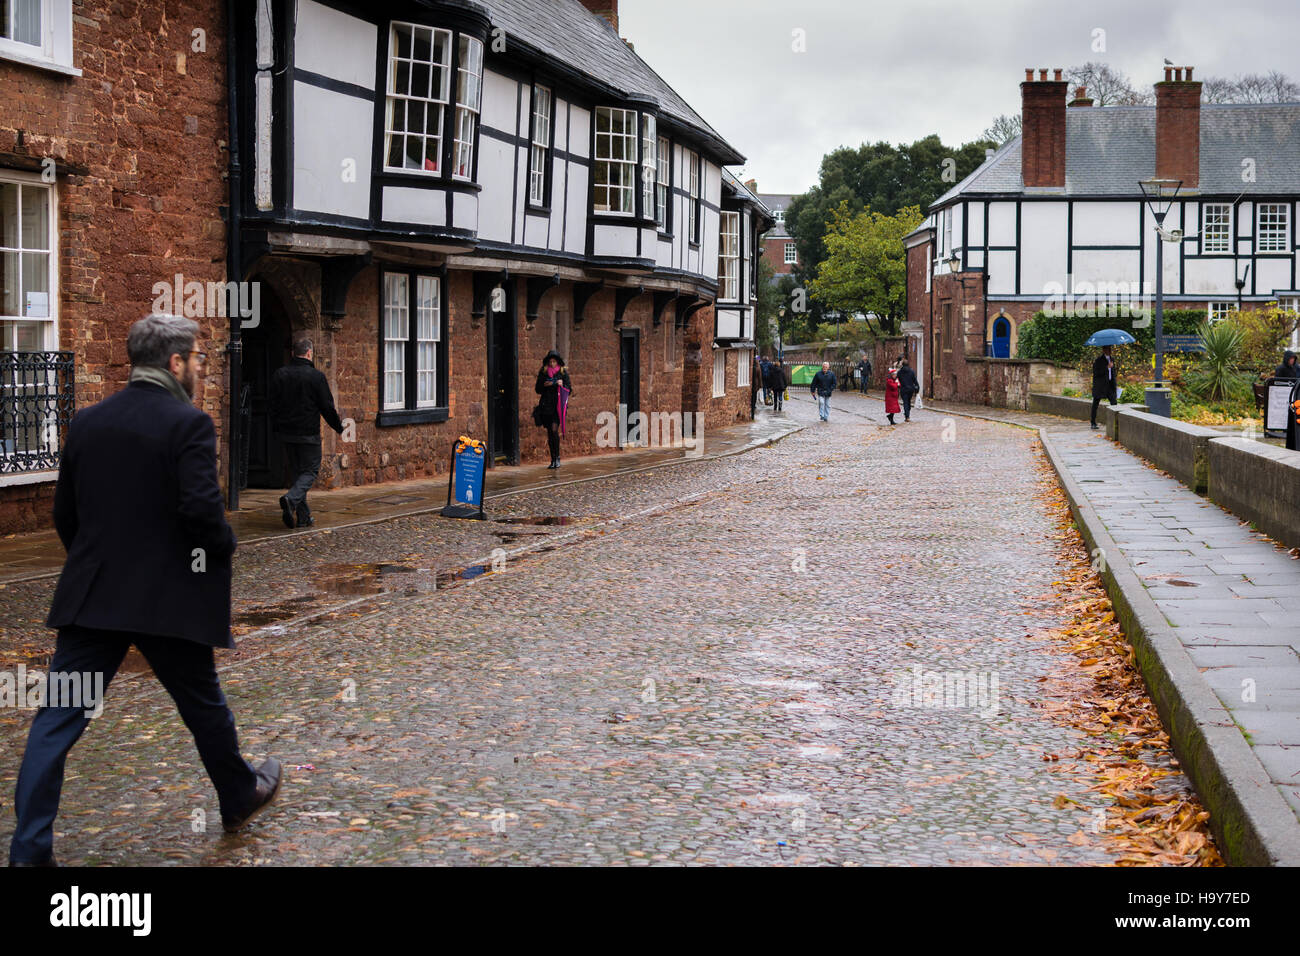 Exeter, England, UK - 22 November 2016: Unidentified people walk on Cathedral Cl street in Exeter. Stock Photo